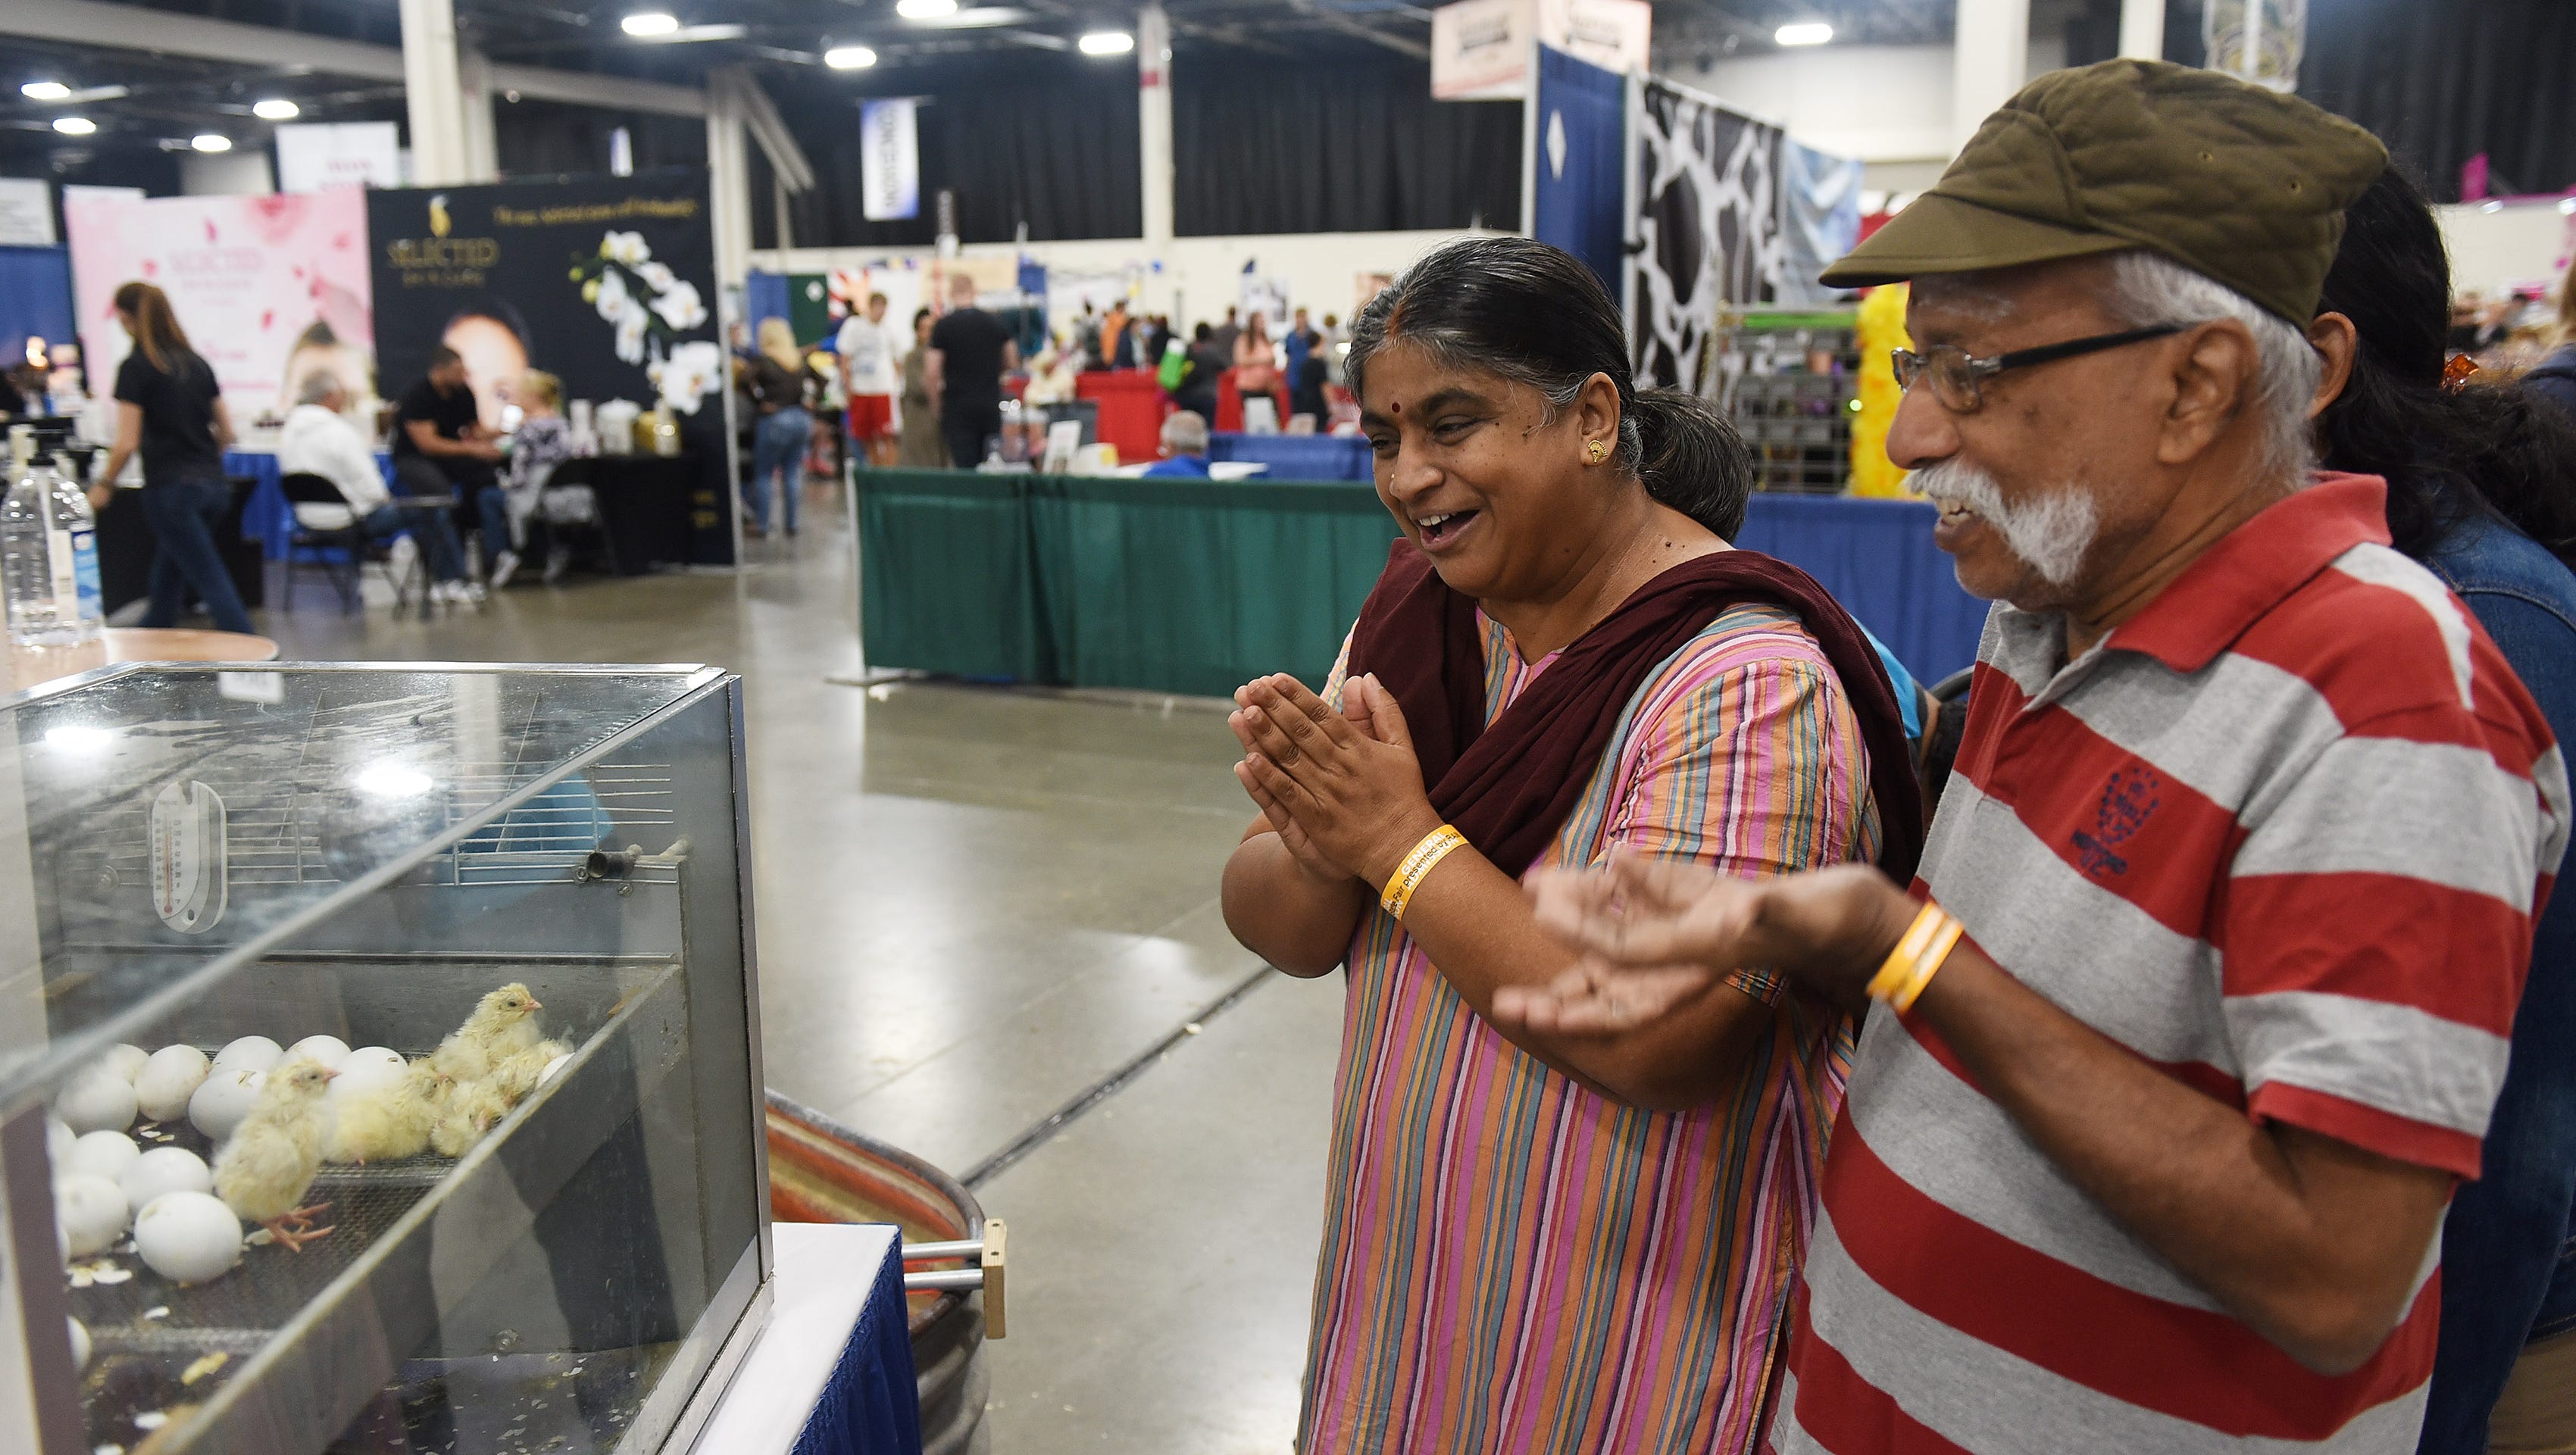 Jayanthi Shanker and her husband, Shanker Balaram of Farmington Hills react with the newly-hatched chicks at the Beginning of Life display.